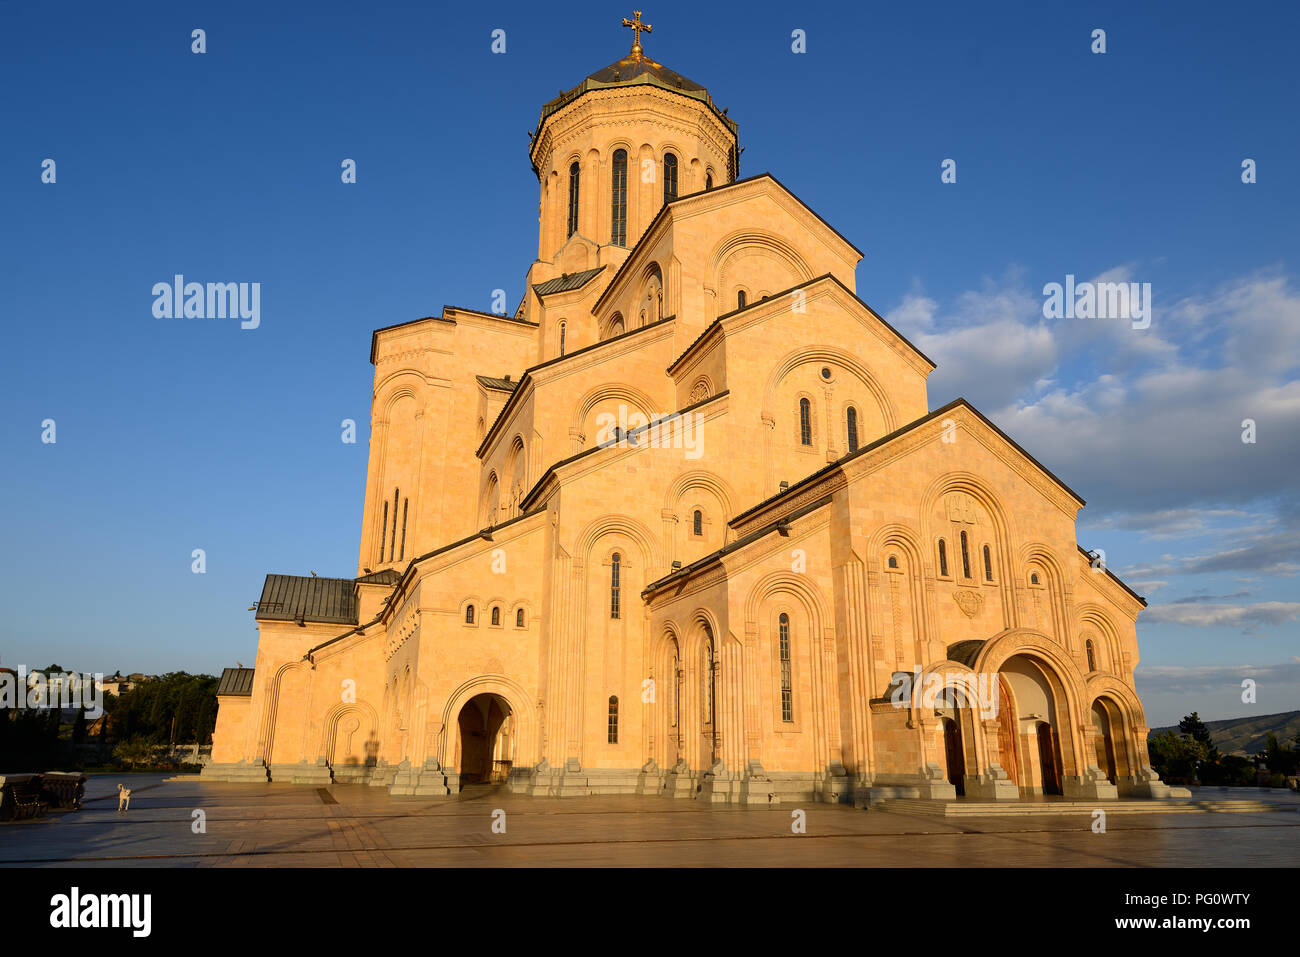 Holy Trinity Cathedral is the main cathedral of the Georgian Orthodox Church located in Tbilisi, the capital of Georgia Stock Photo